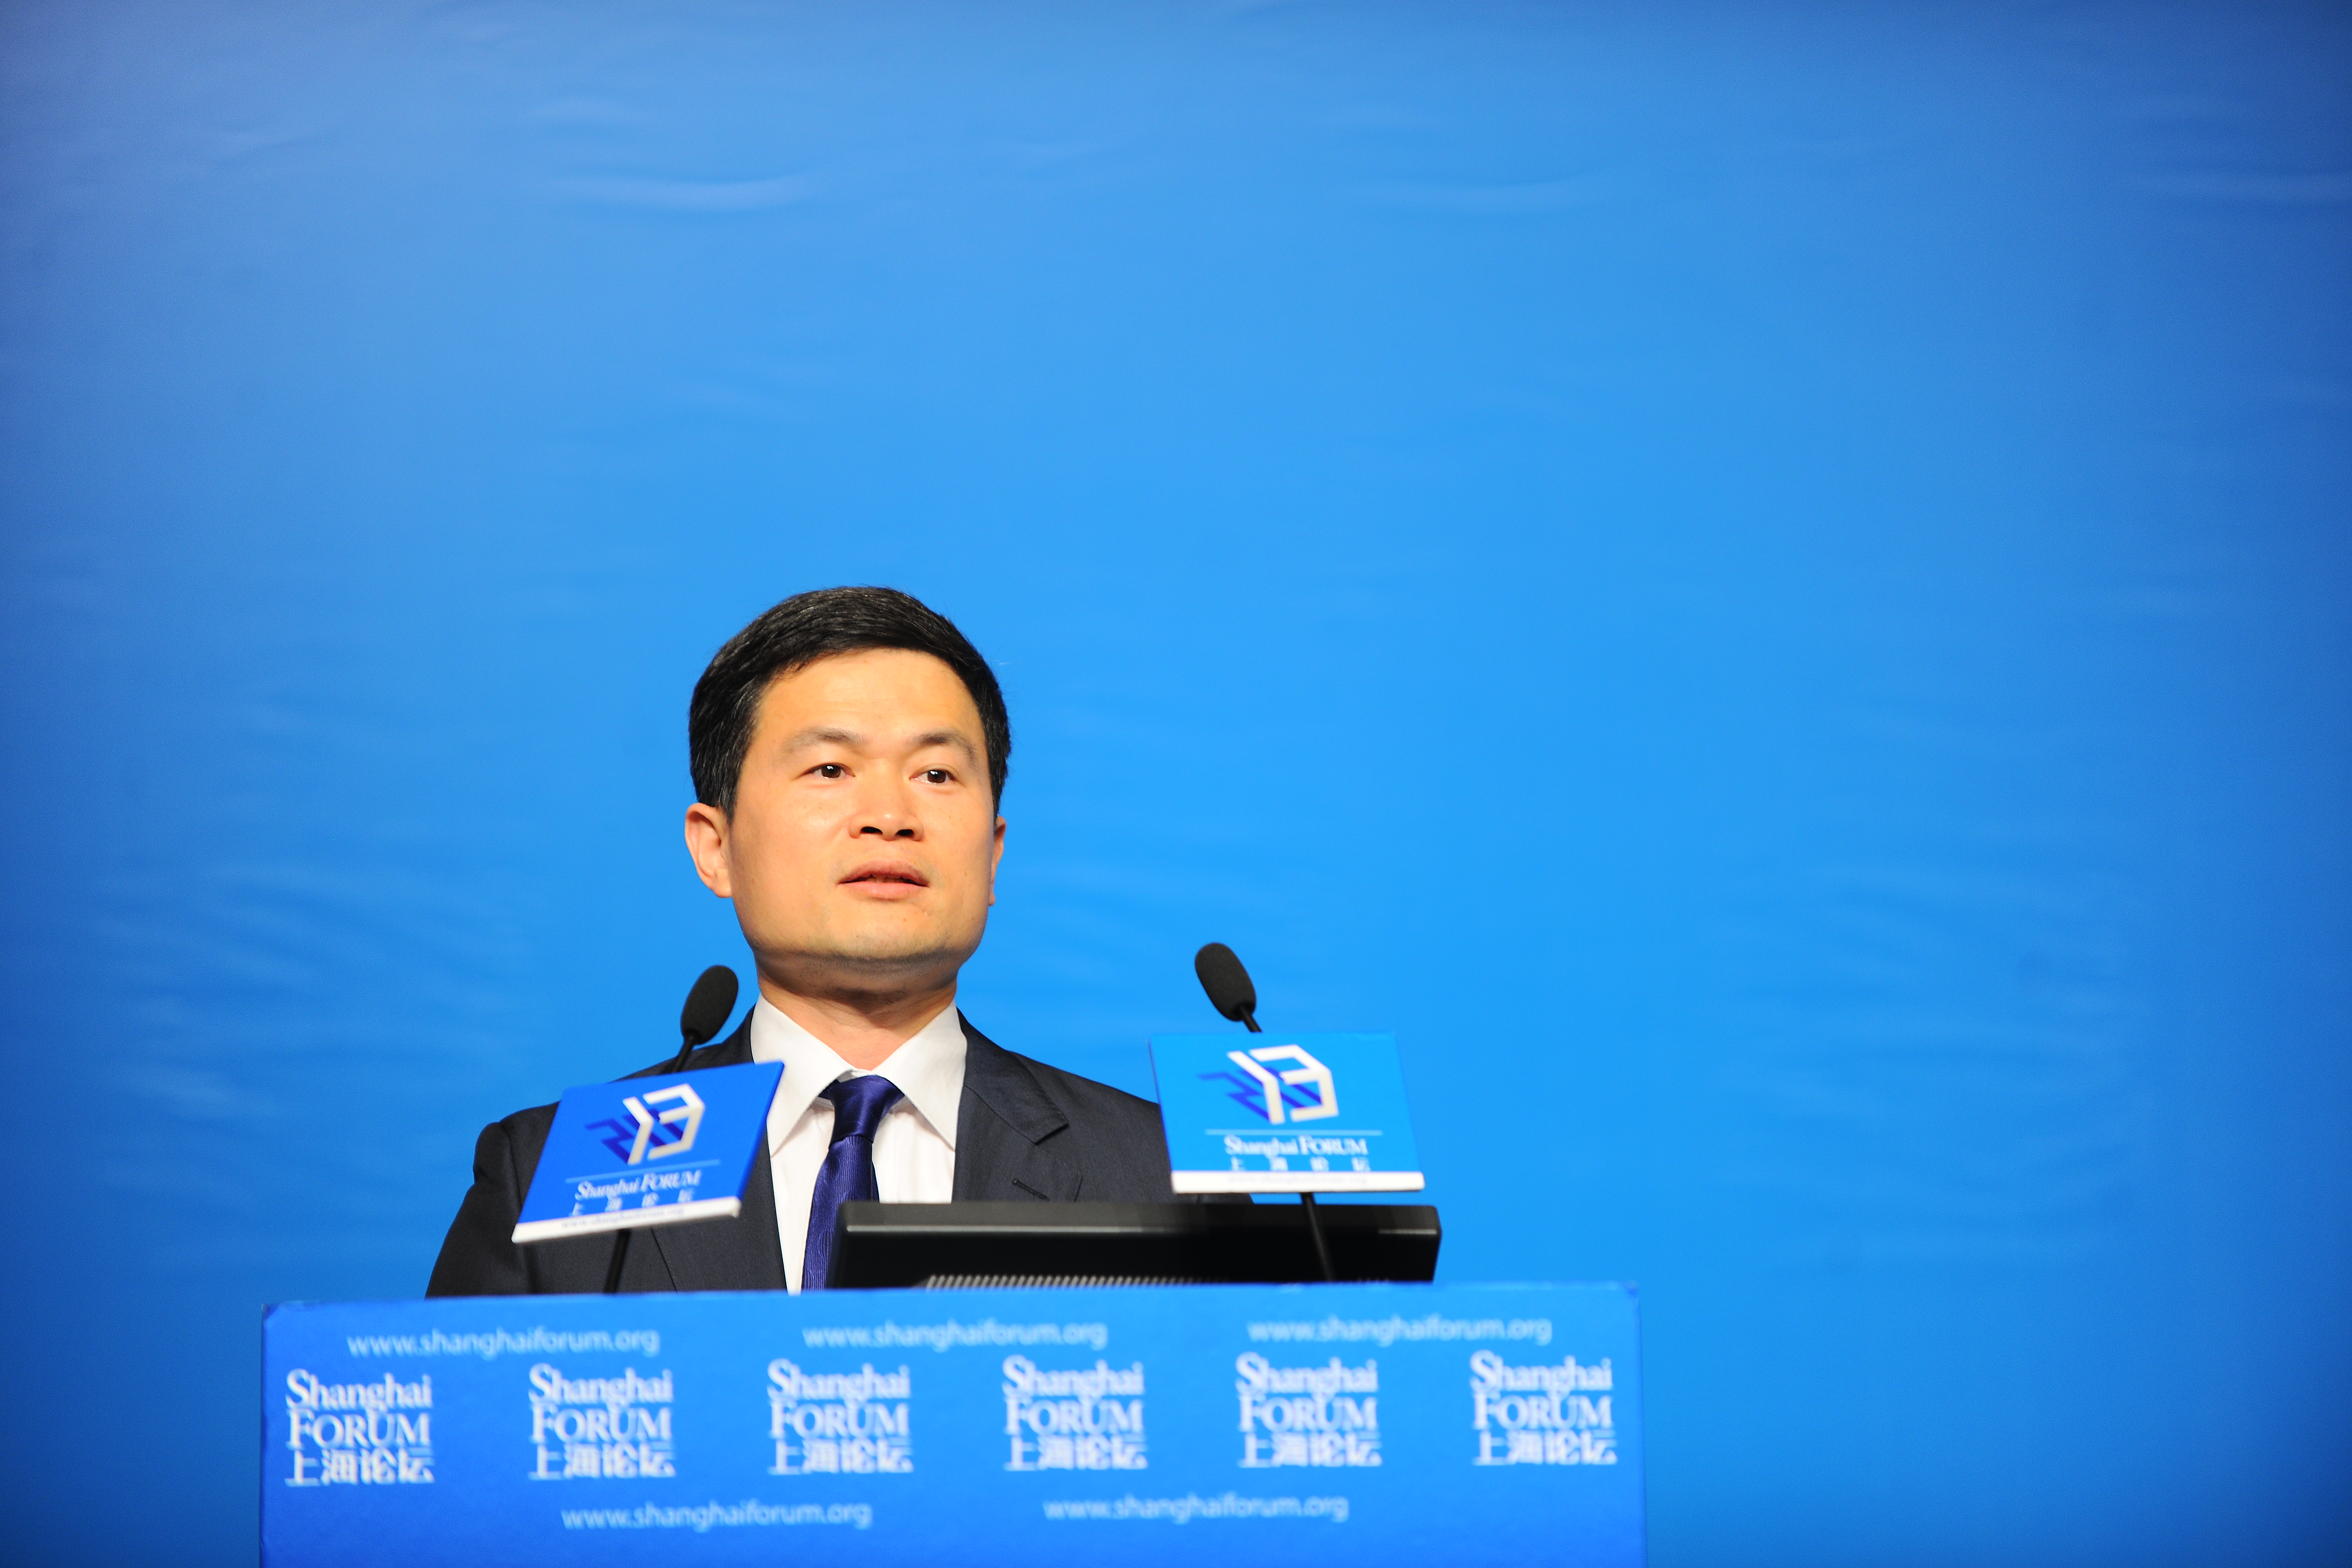 Fang Xinghai (Opening Ceremony, Shanghai Forum 2013)